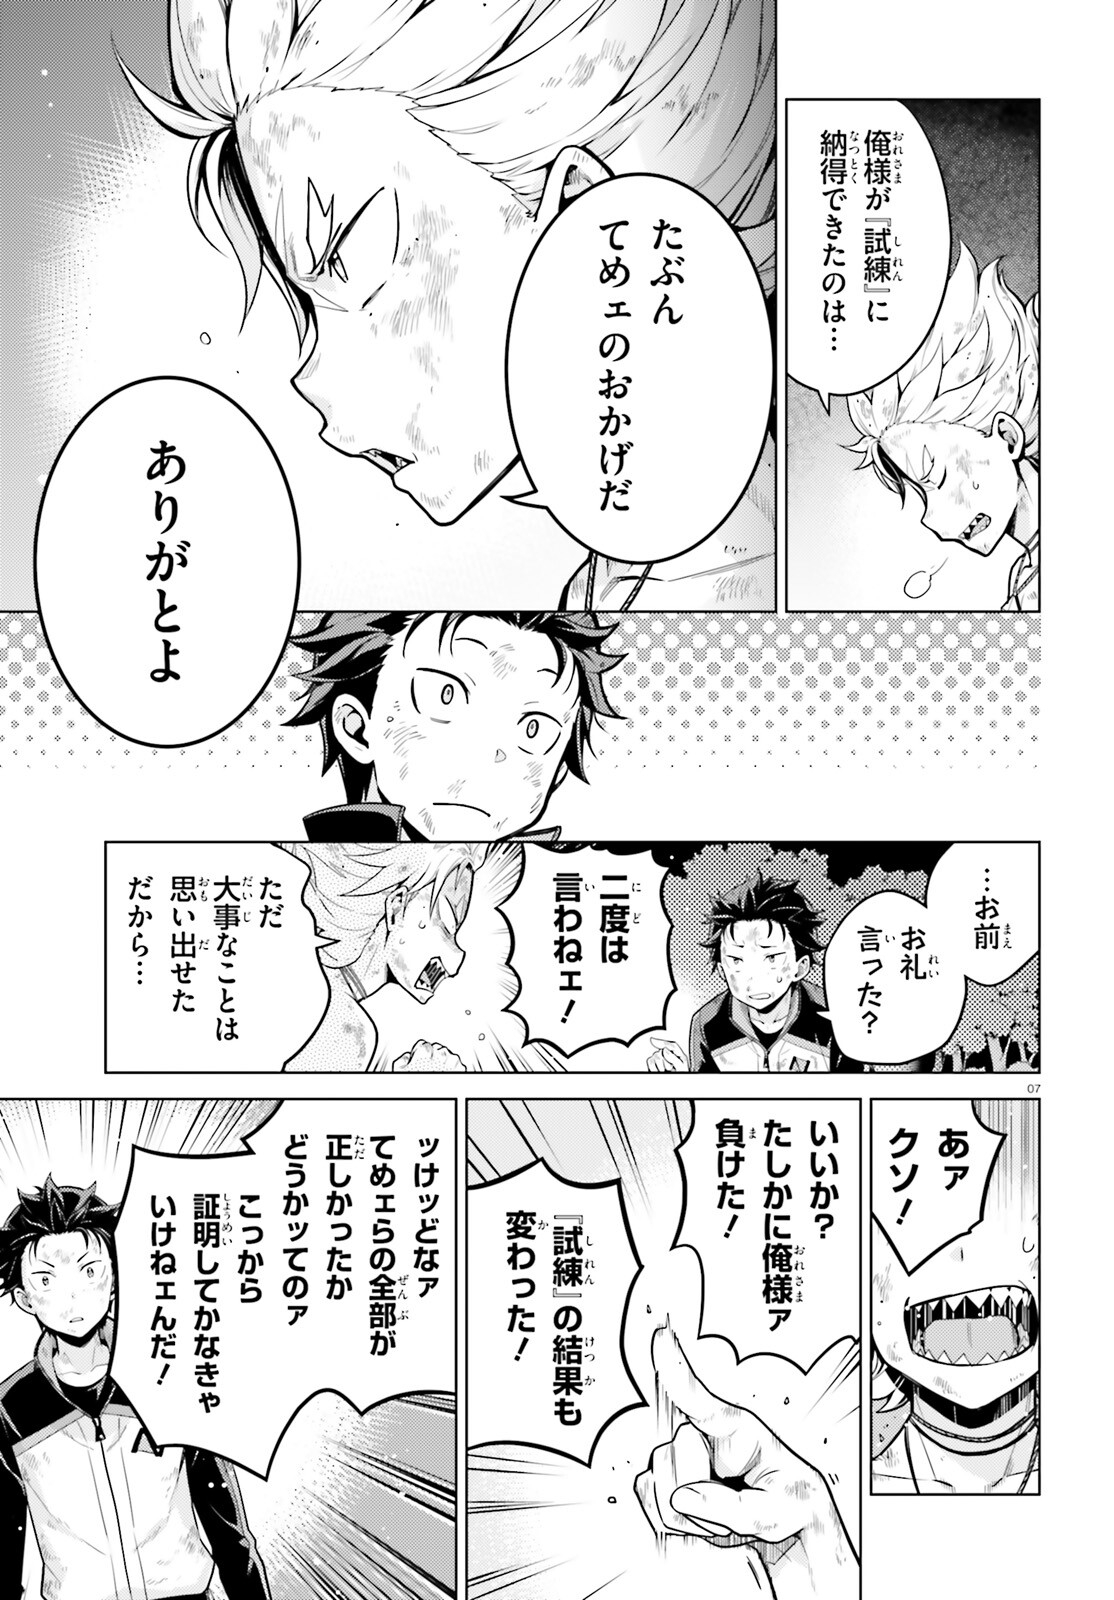 Reゼロから始める異世界生活 第四章 聖域と強欲の魔女 第50話 - Page 7